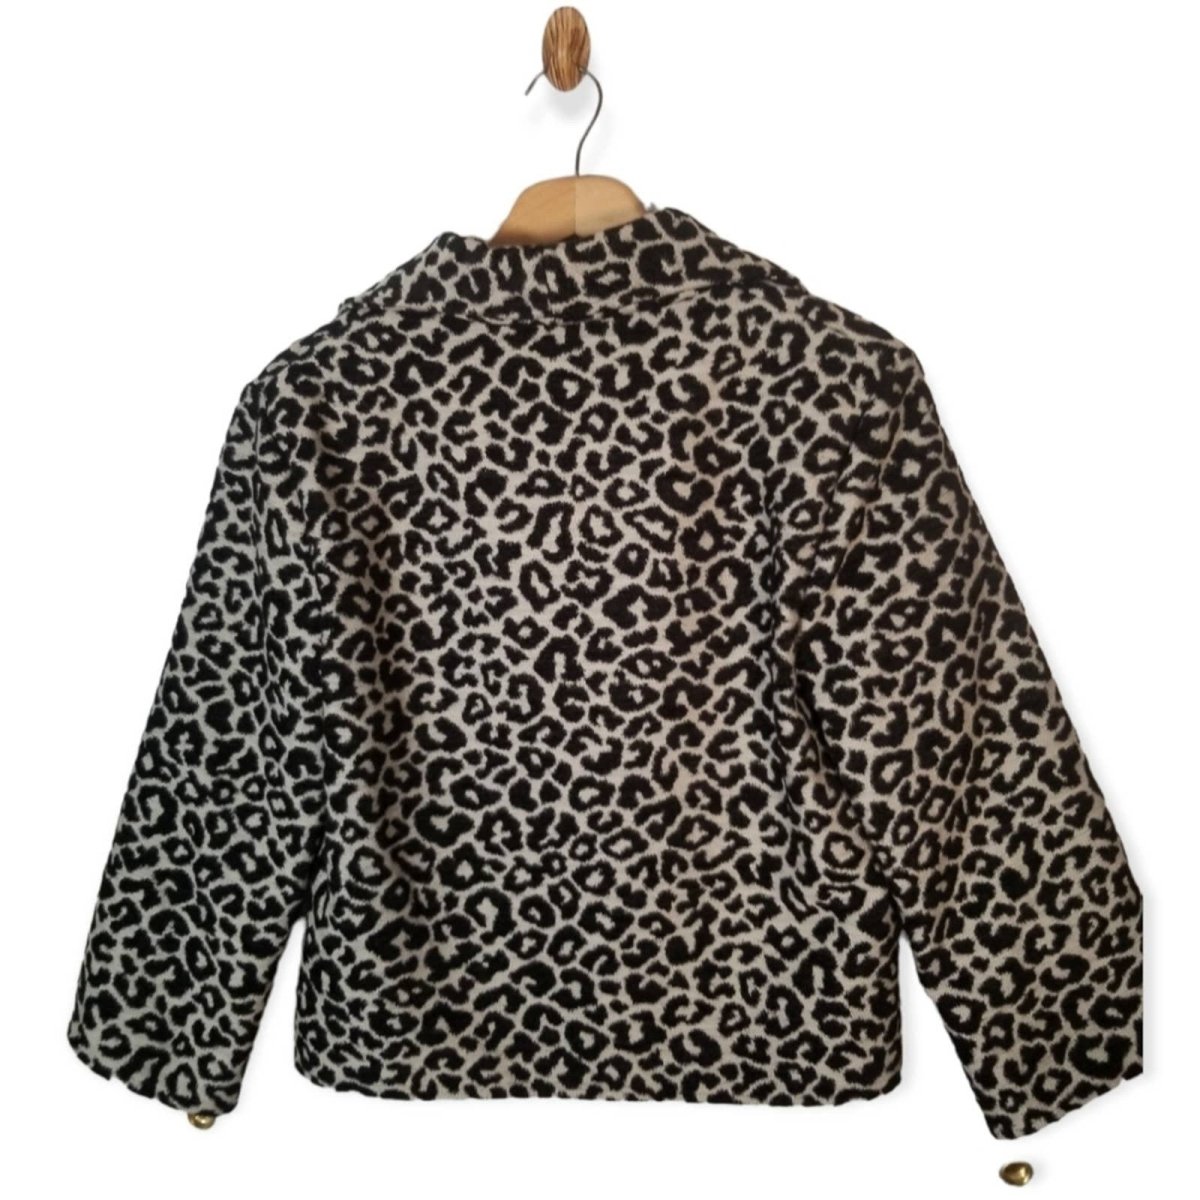 Vintage 90s Metallic Leopard Cropped Jacket Women's Size Small - themallvintage The Mall Vintage